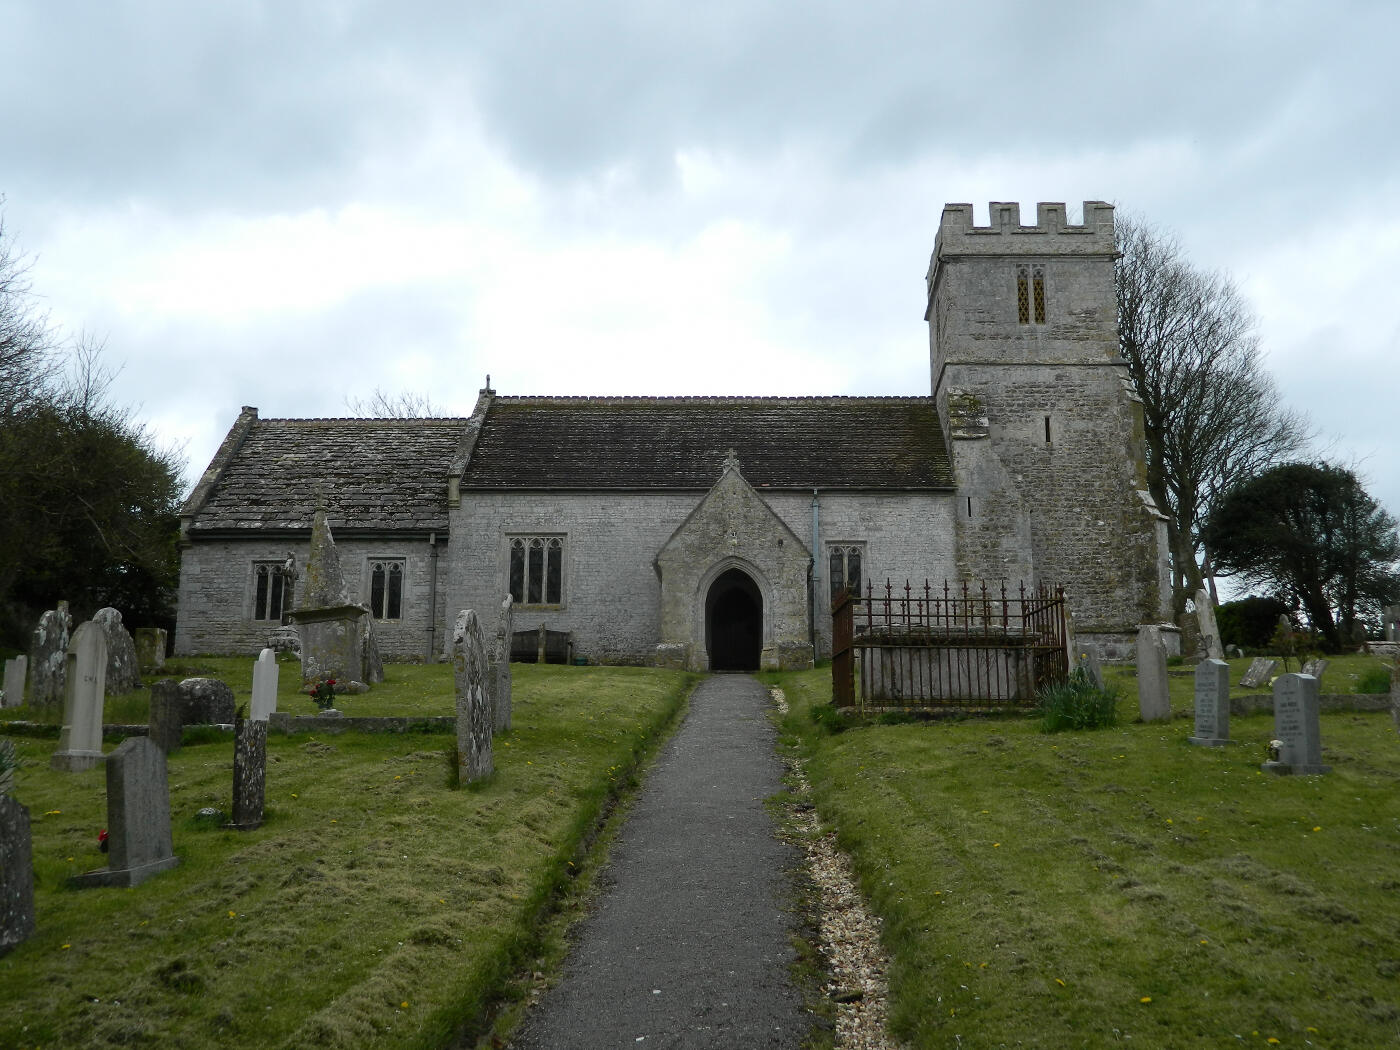 Path leading up to the Church of St Nicholas and graveyard